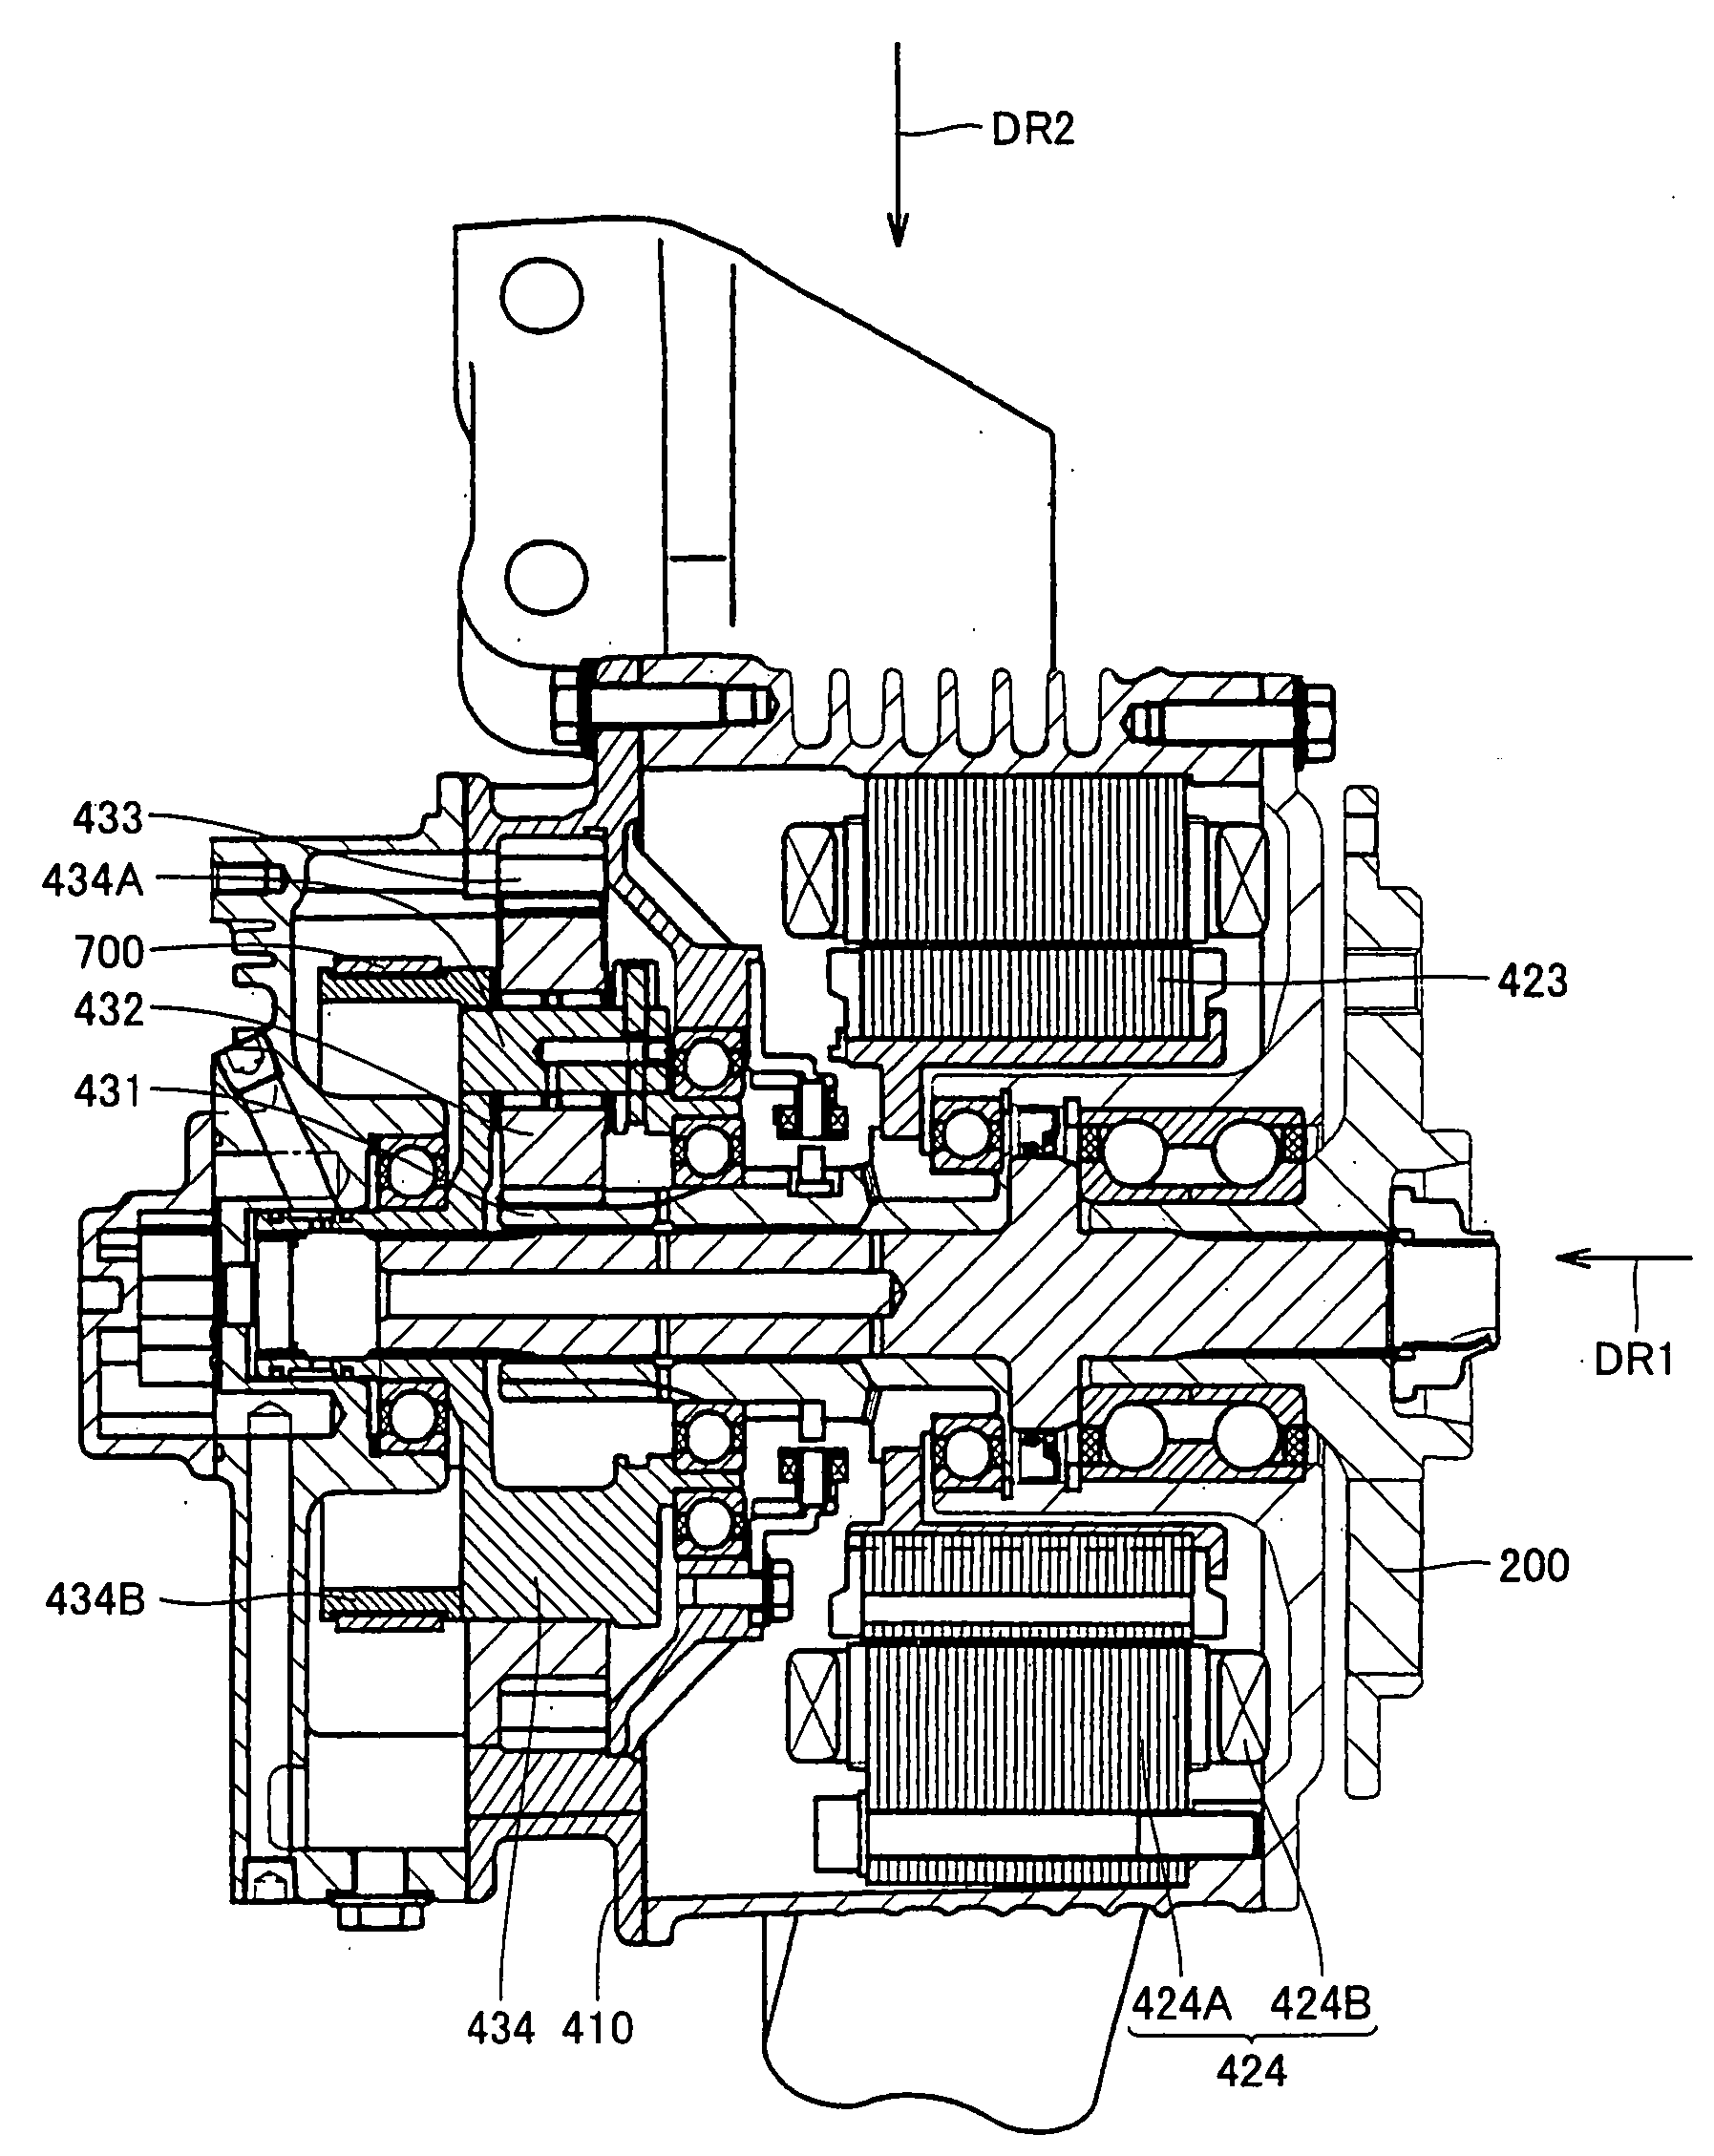 Electrically Driven Wheel and Vehicle